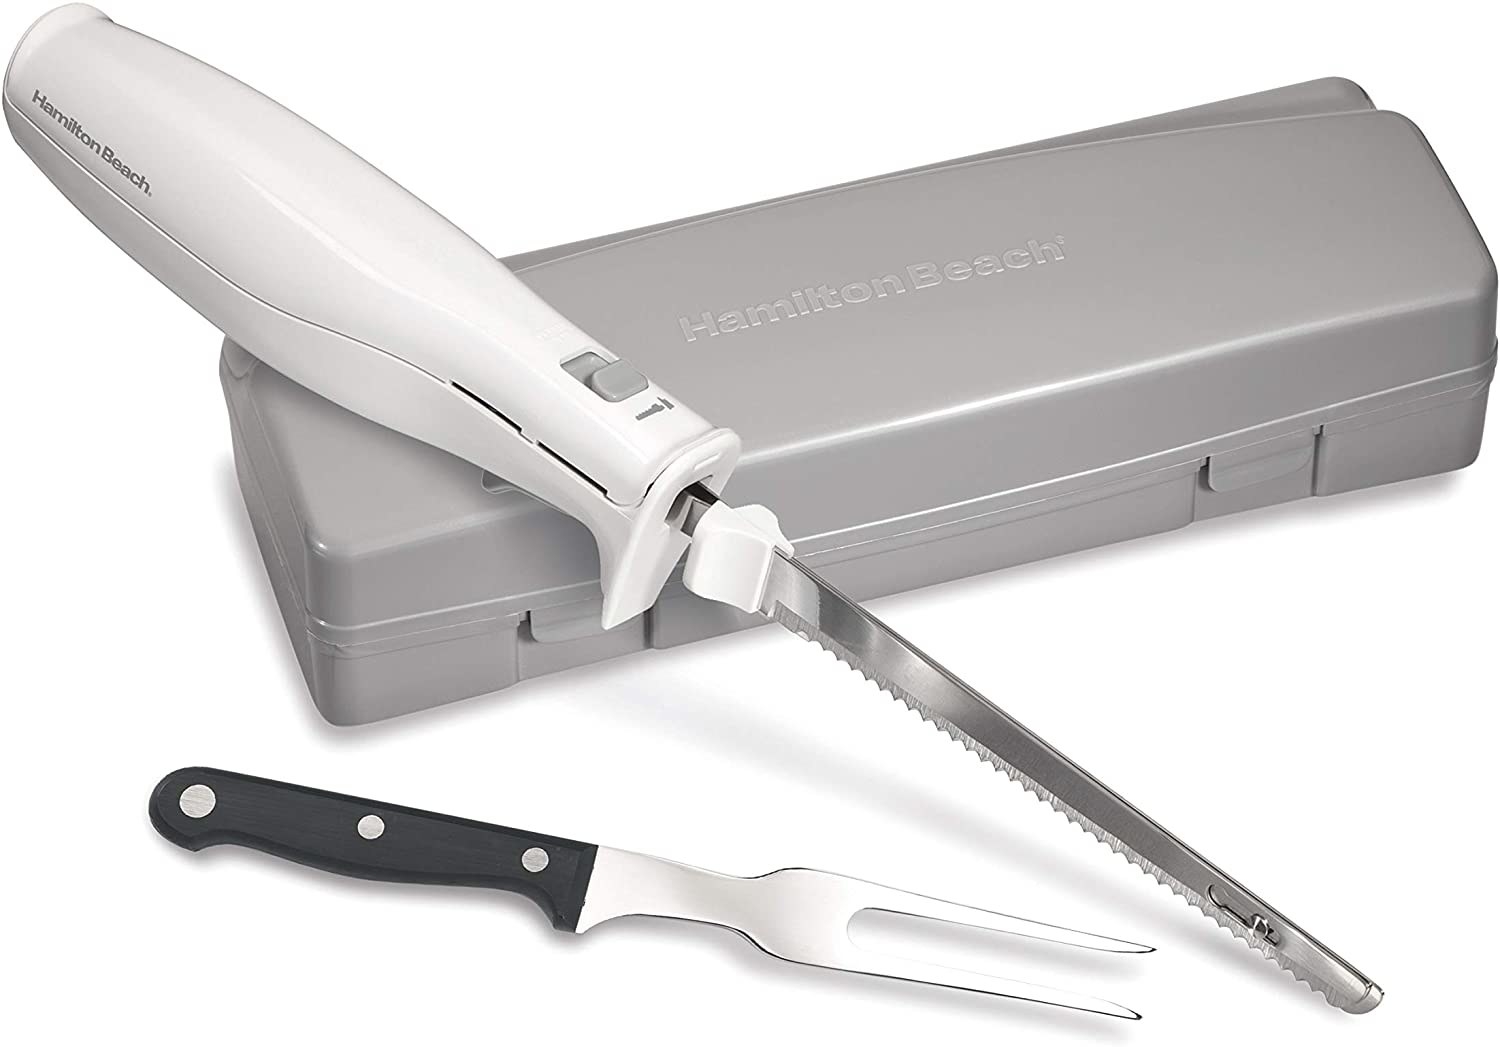 the electric knife, carrying case